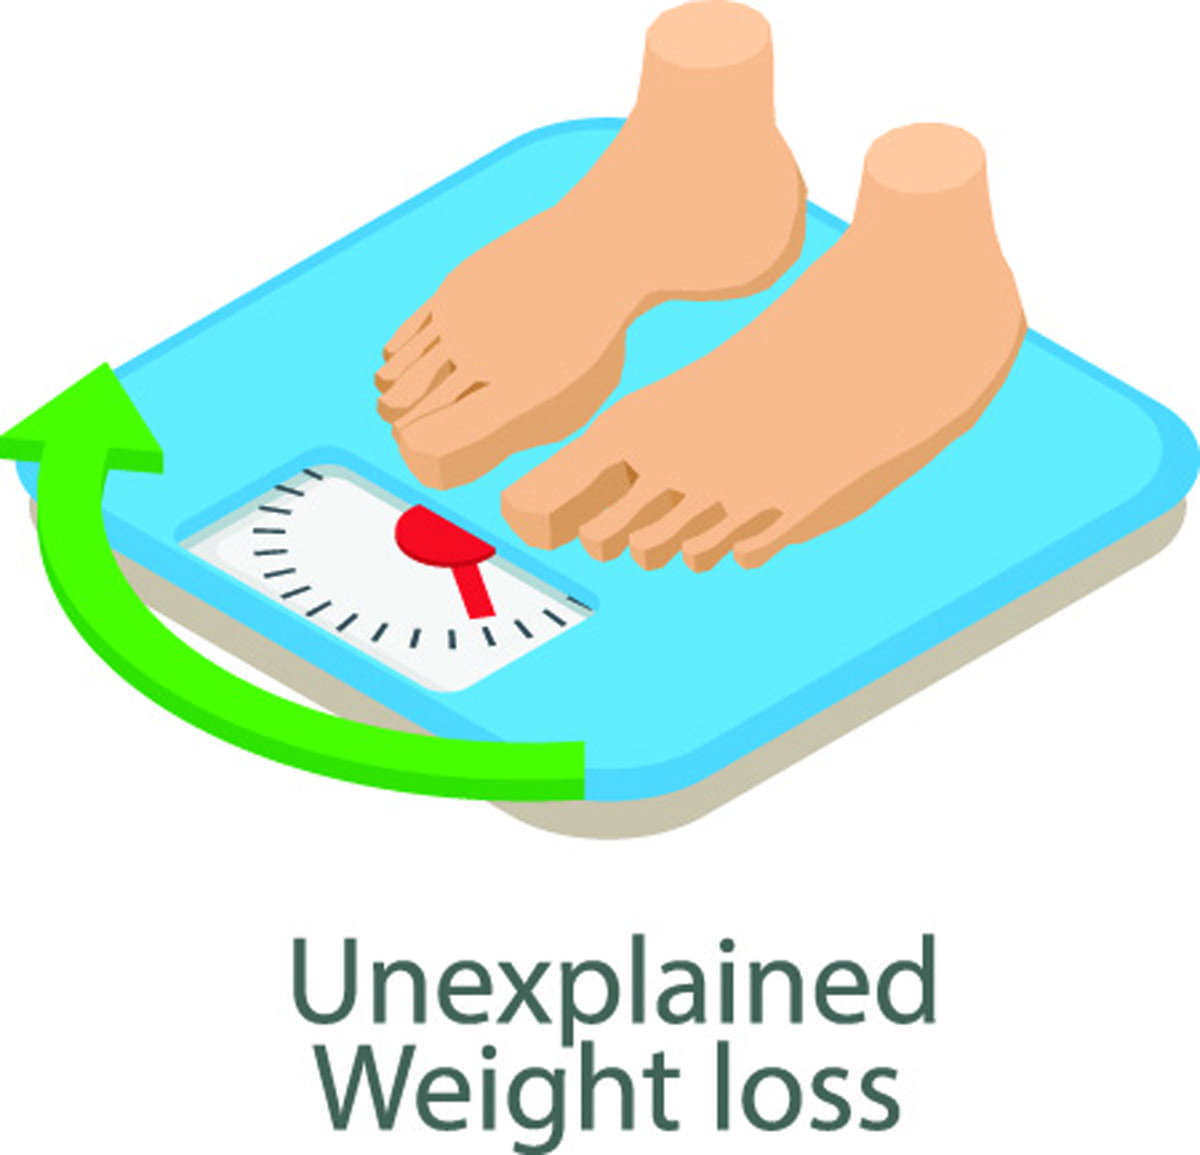 Unexplained weight loss